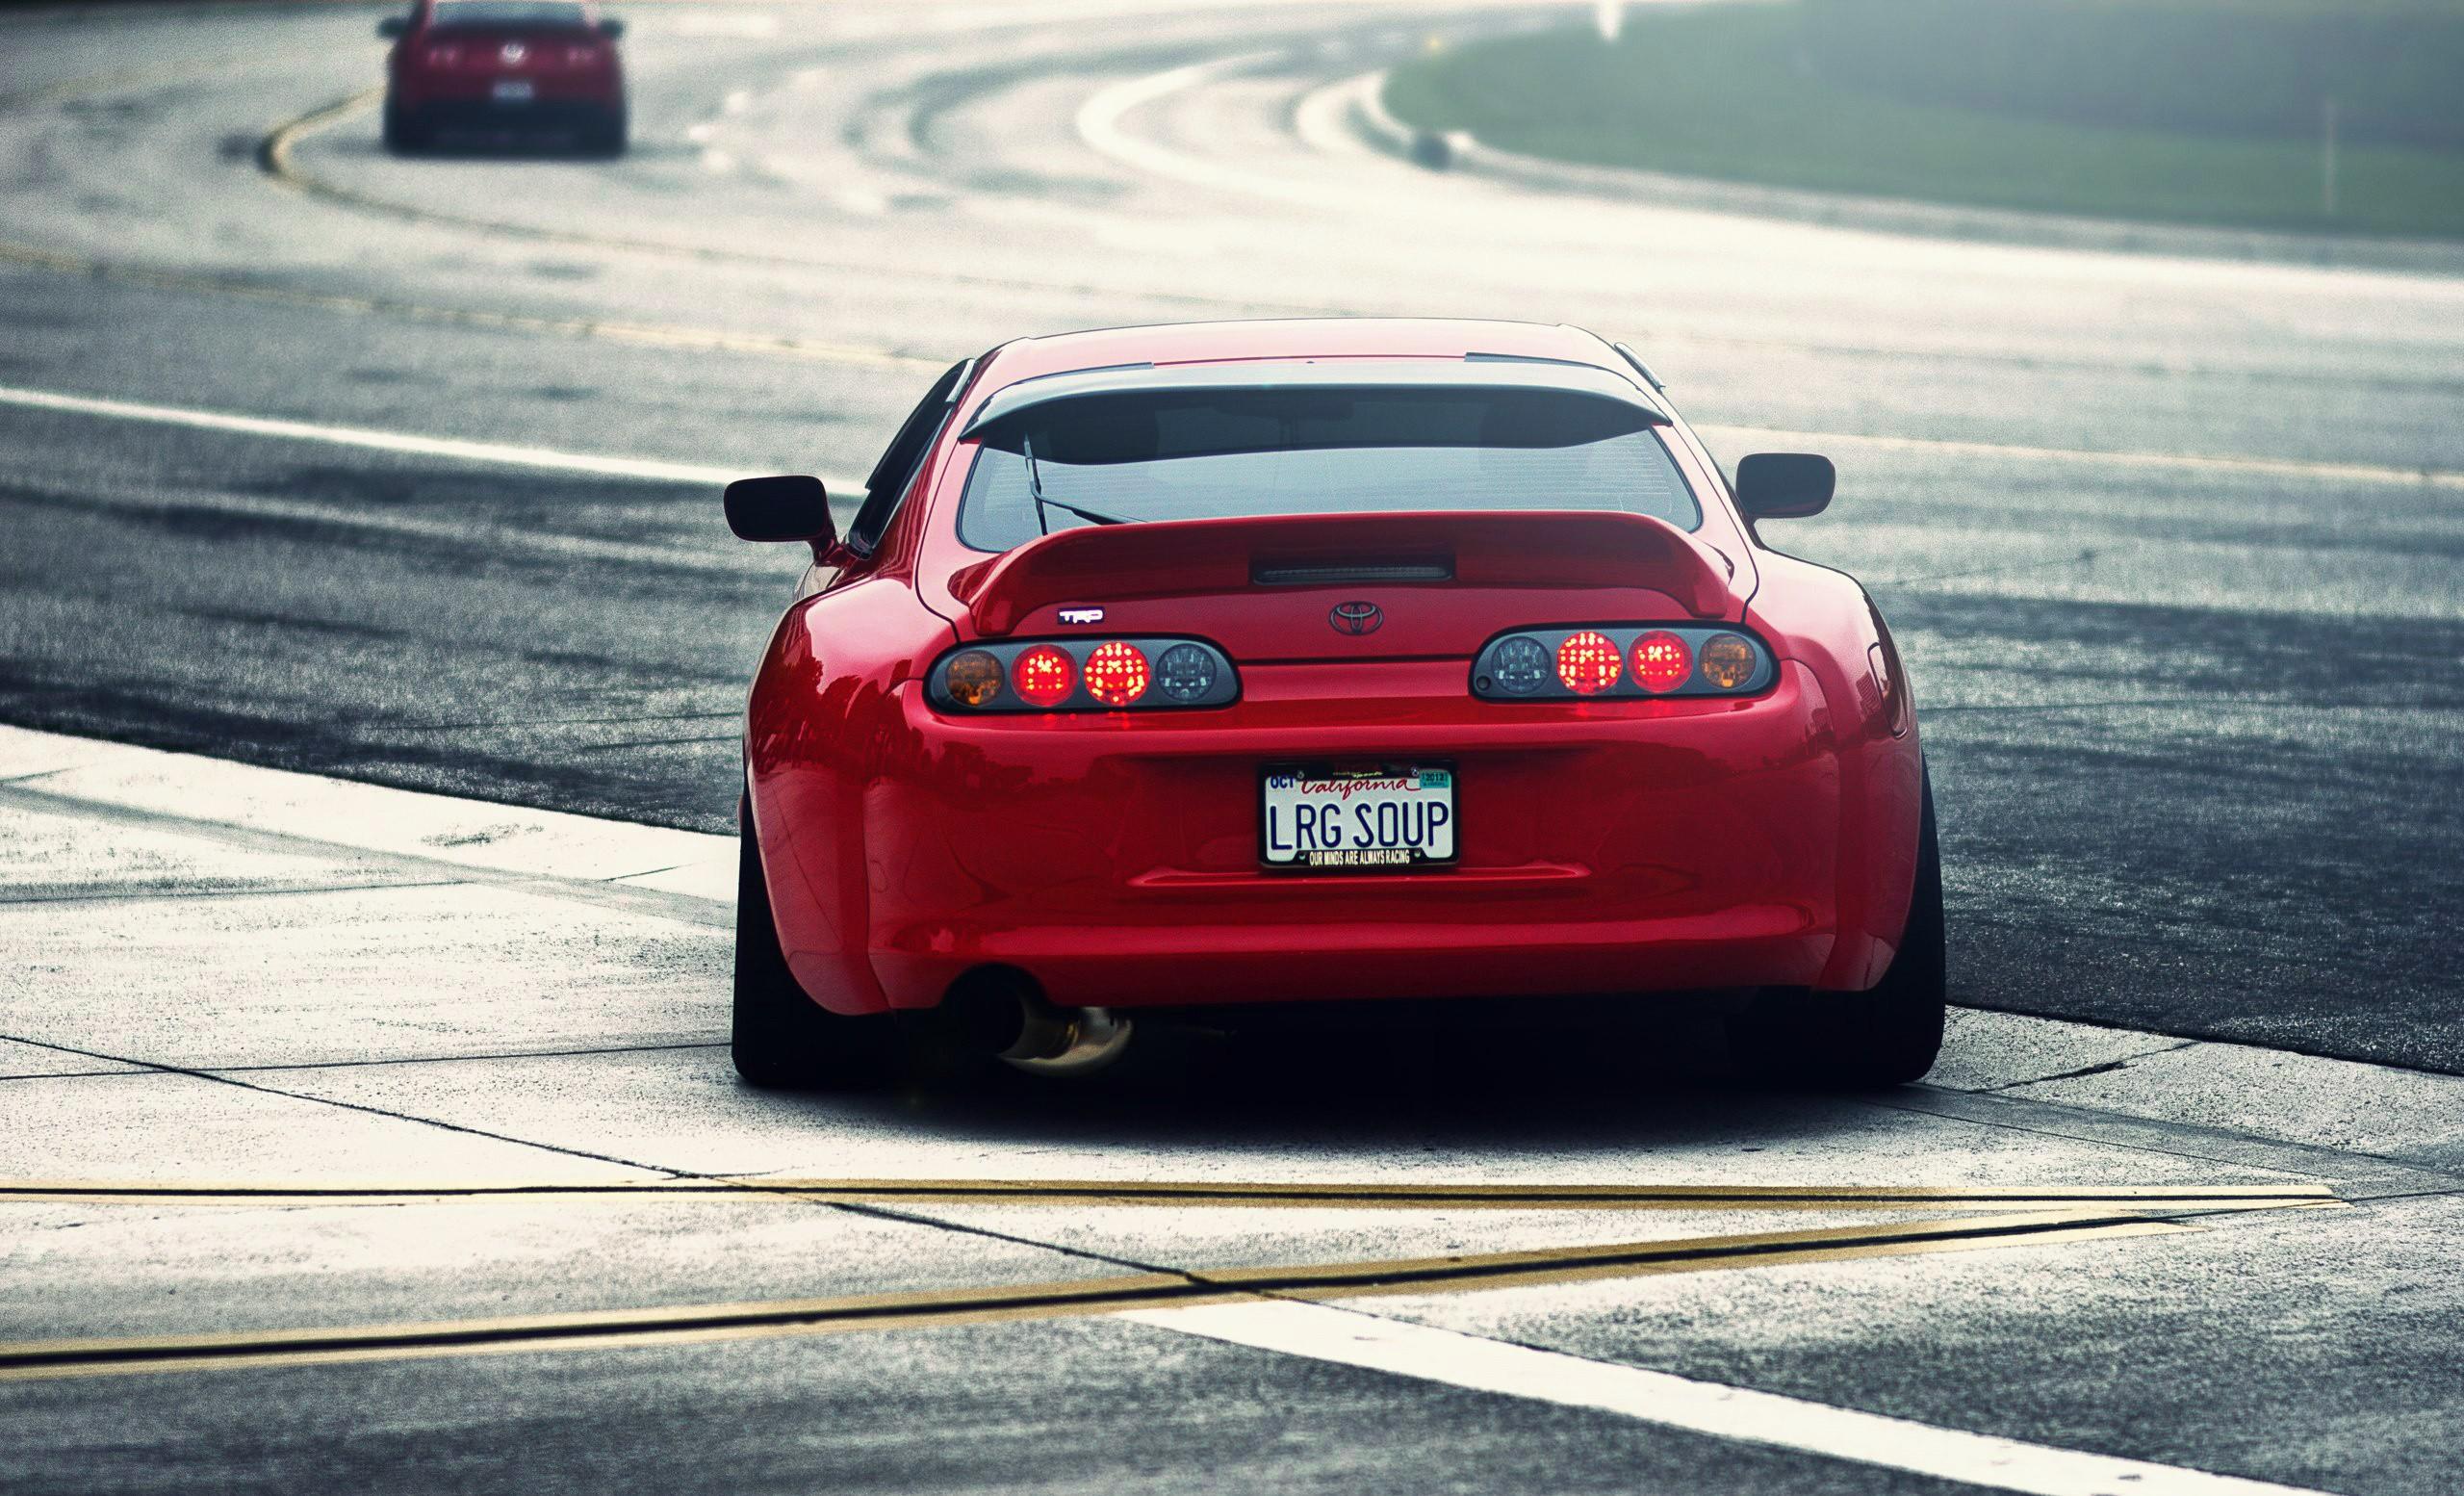 2560 x 1554 · jpeg - Toyota Supra Wallpapers, Pictures, Images